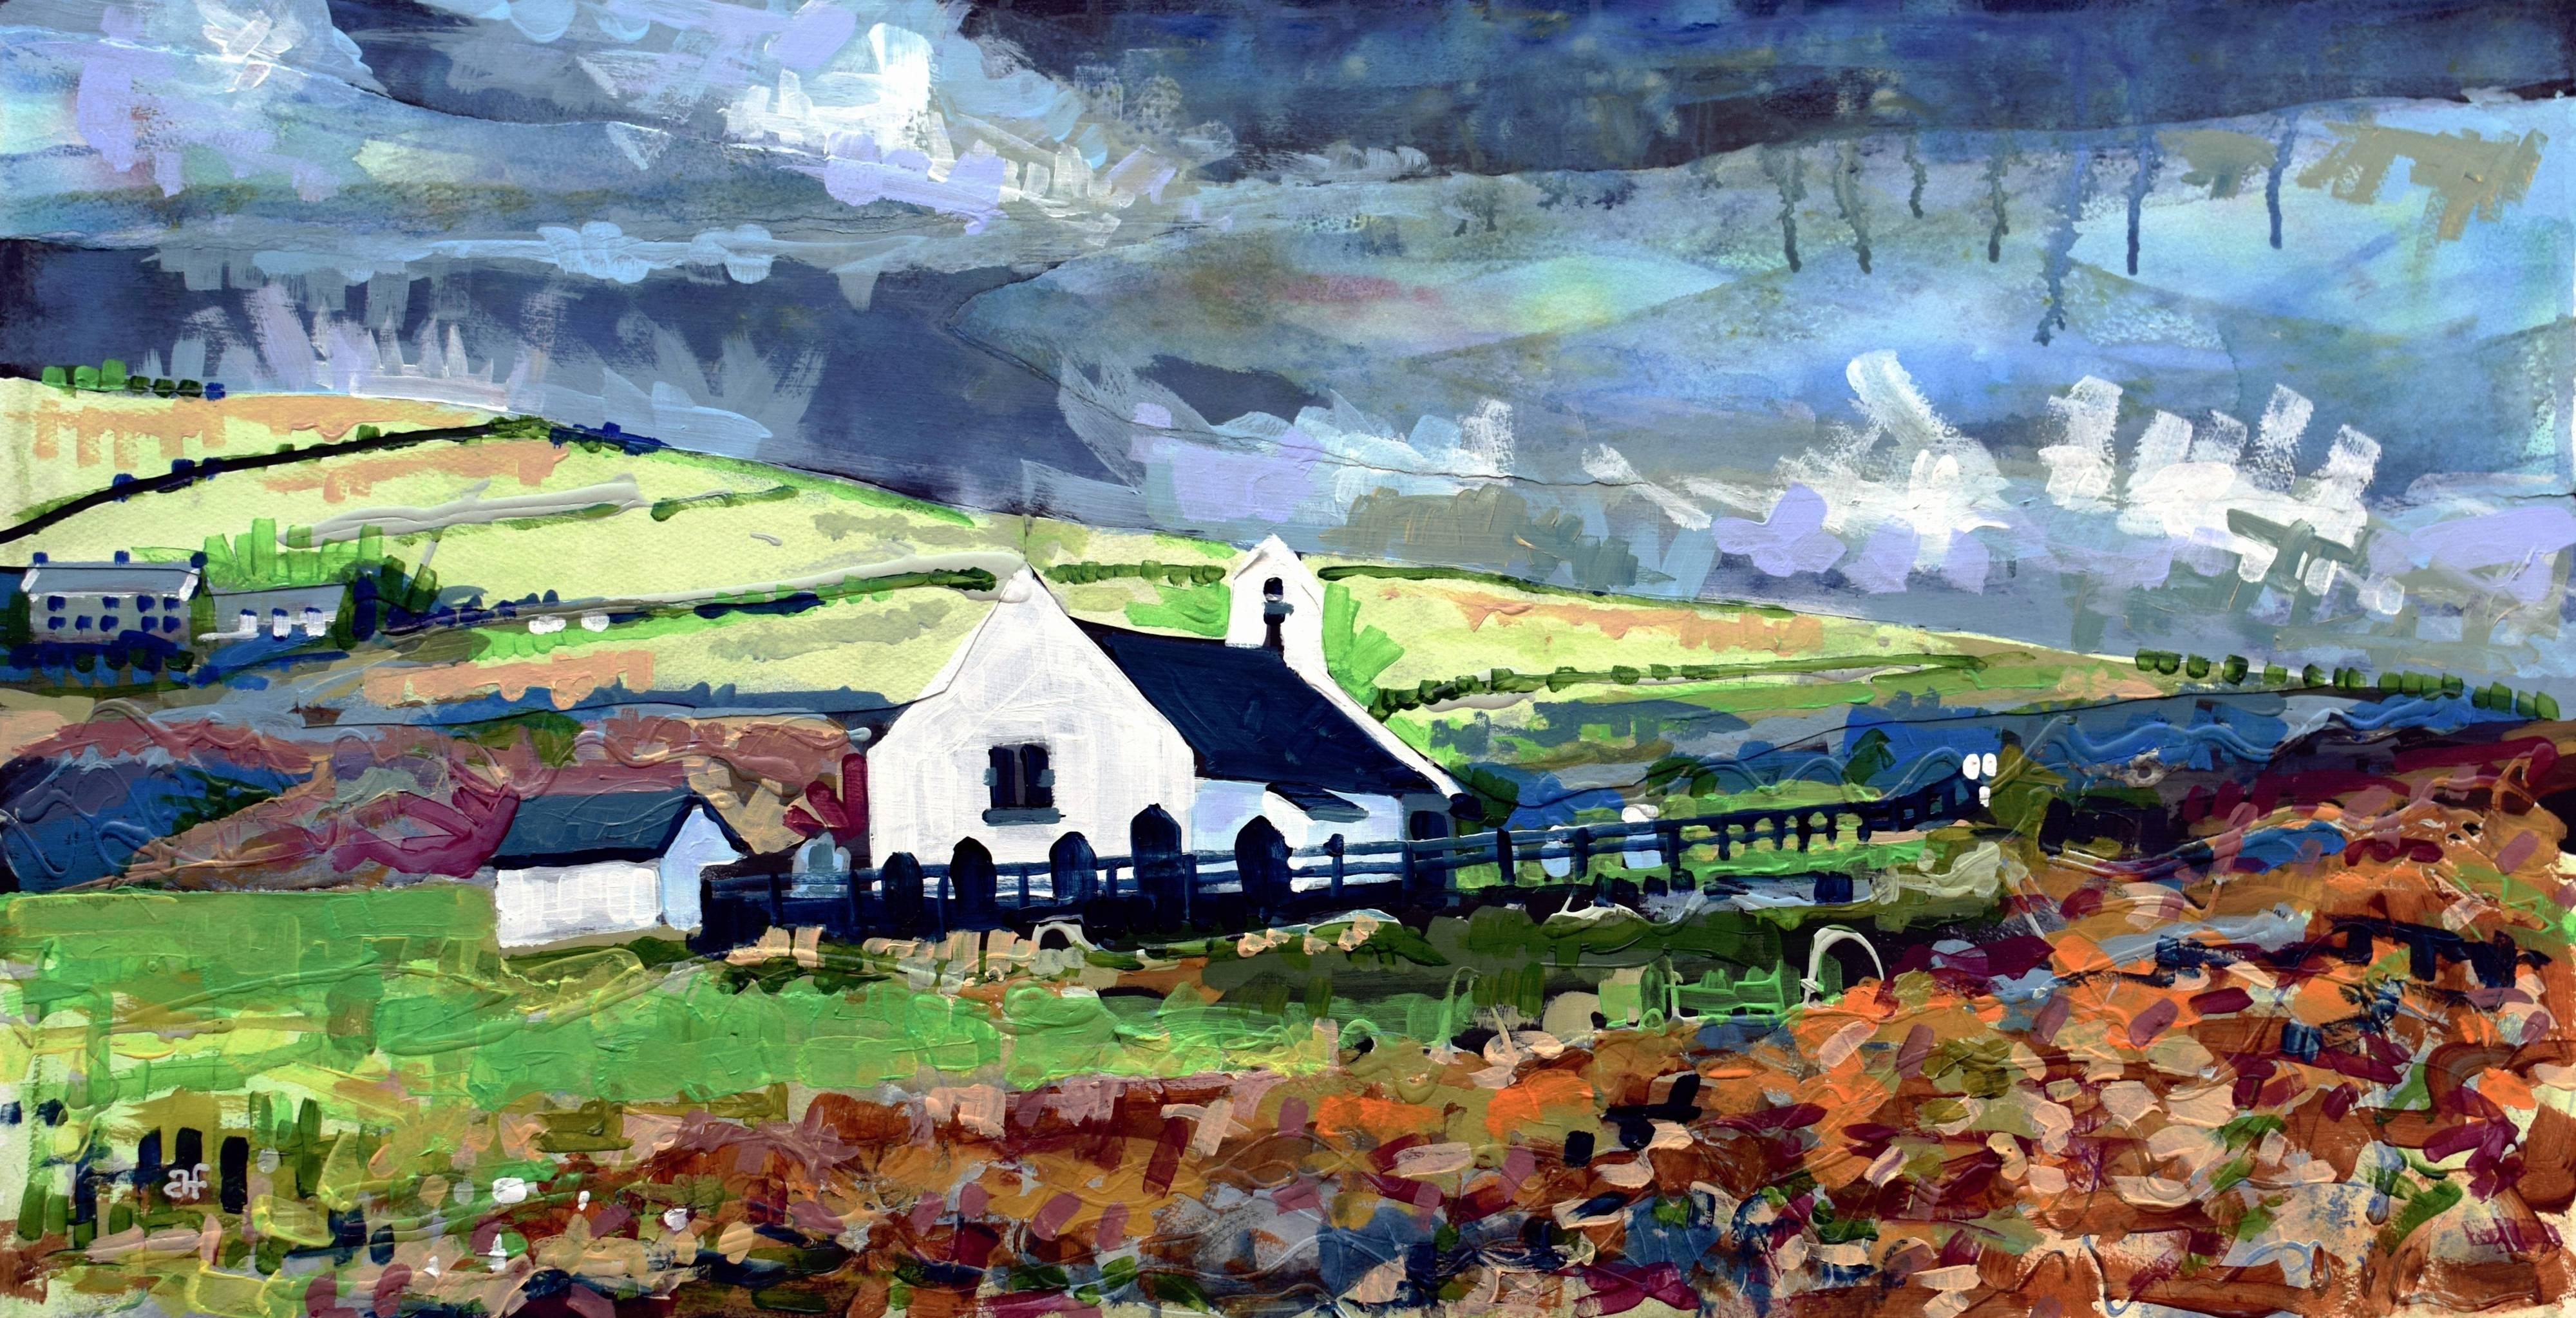 Andrew Francis Landscape Painting - Eglwys y Grog, Mwnt: Contemporary British Landscape Oil Painting 